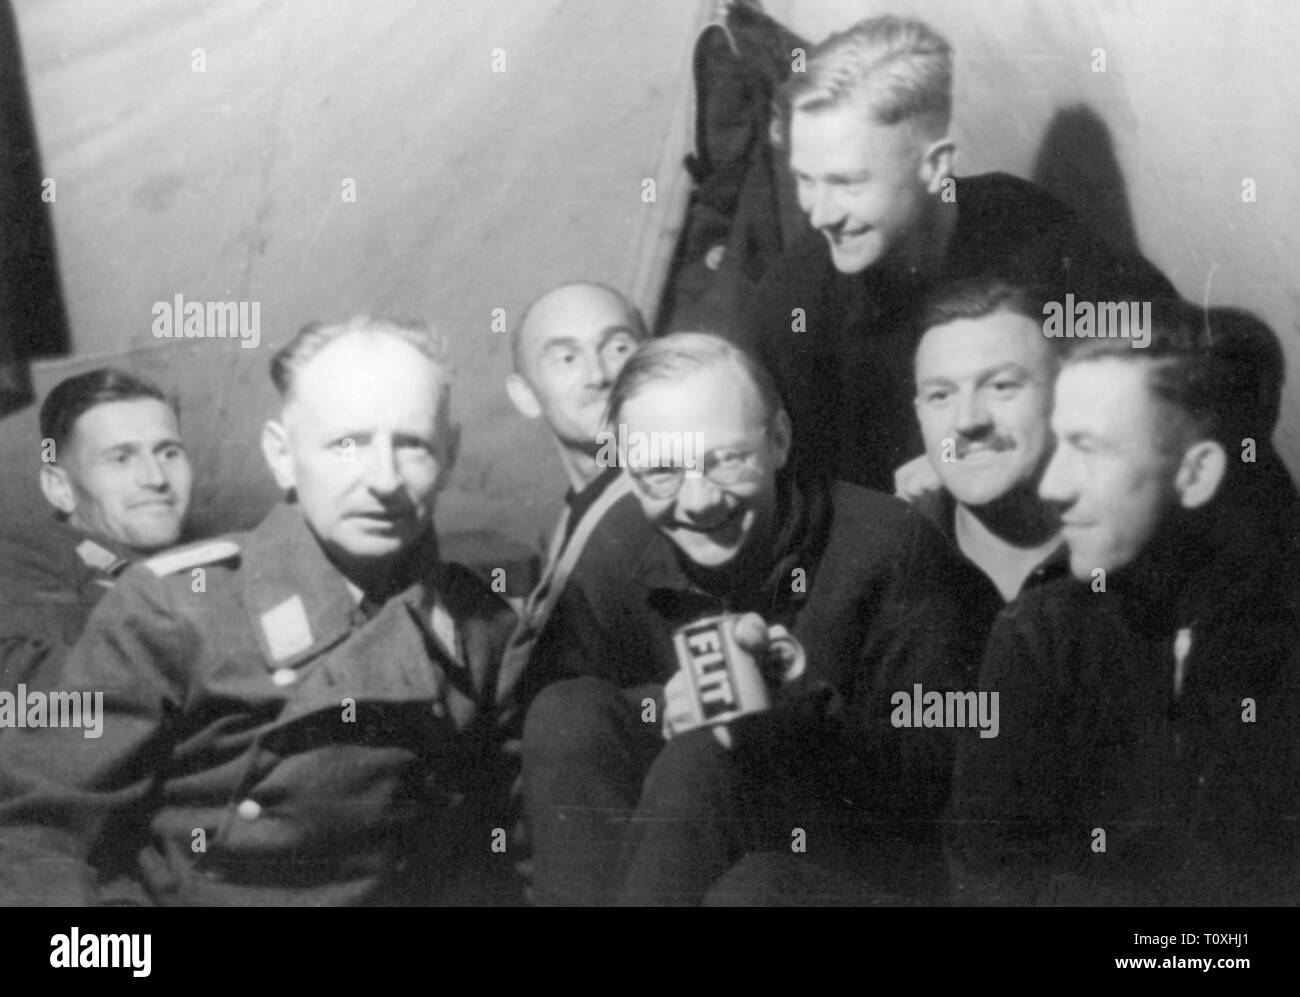 Second World War / WWII, Russia 1941, group of members of the 3rd Luftwaffe War Correspondent Company in camp, August 1941, Operation Barbarossa, eastern front, soldiers, soldier, tent, tents, cheerfulness, geniality, good mood, German Luftwaffe (German Air Force), war reporter, propaganda company, companies, propaganda corps, Wehrmacht, armed forces, people, 20th century, 1940s, second, 2nd, world war, world wars, group, groups, members, member, camp, camps, historic, historical, Additional-Rights-Clearance-Info-Not-Available Stock Photo